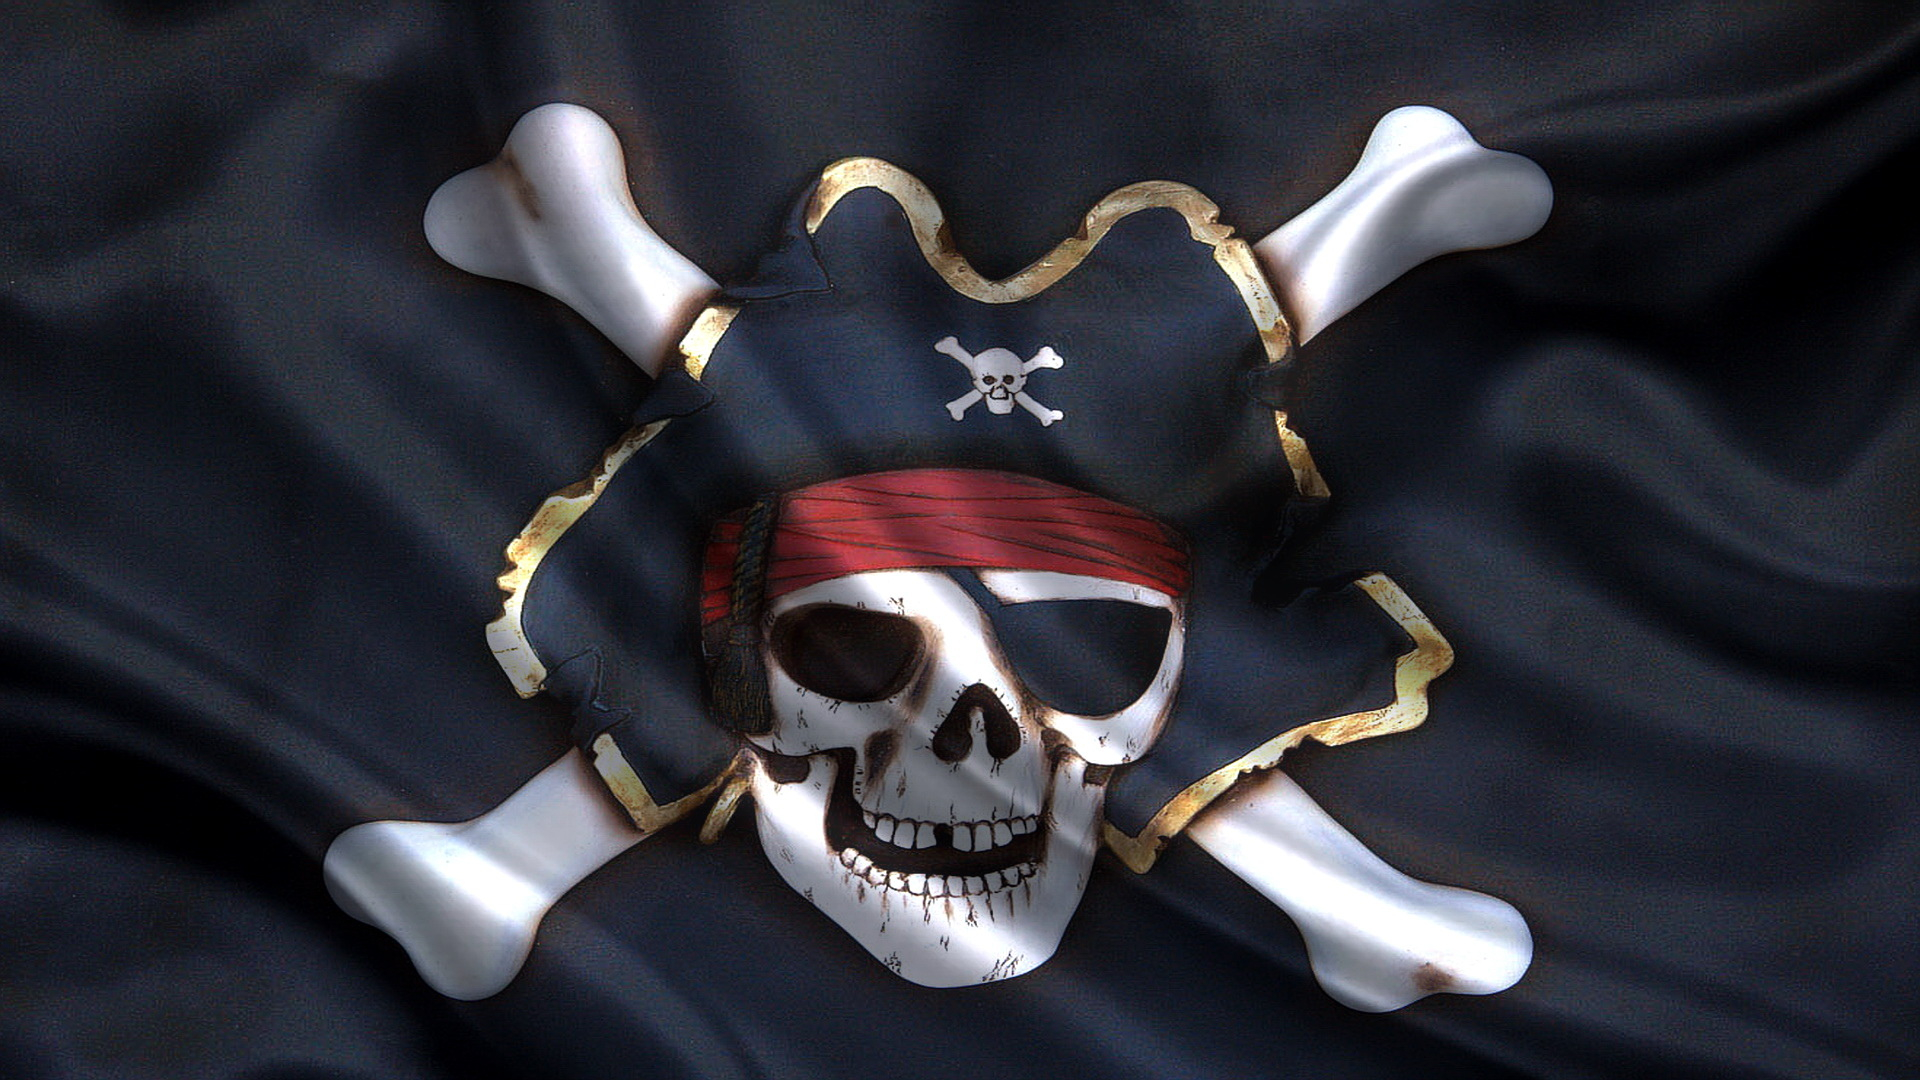 black pirate flag wallpapers55com   Best Wallpapers for PCs